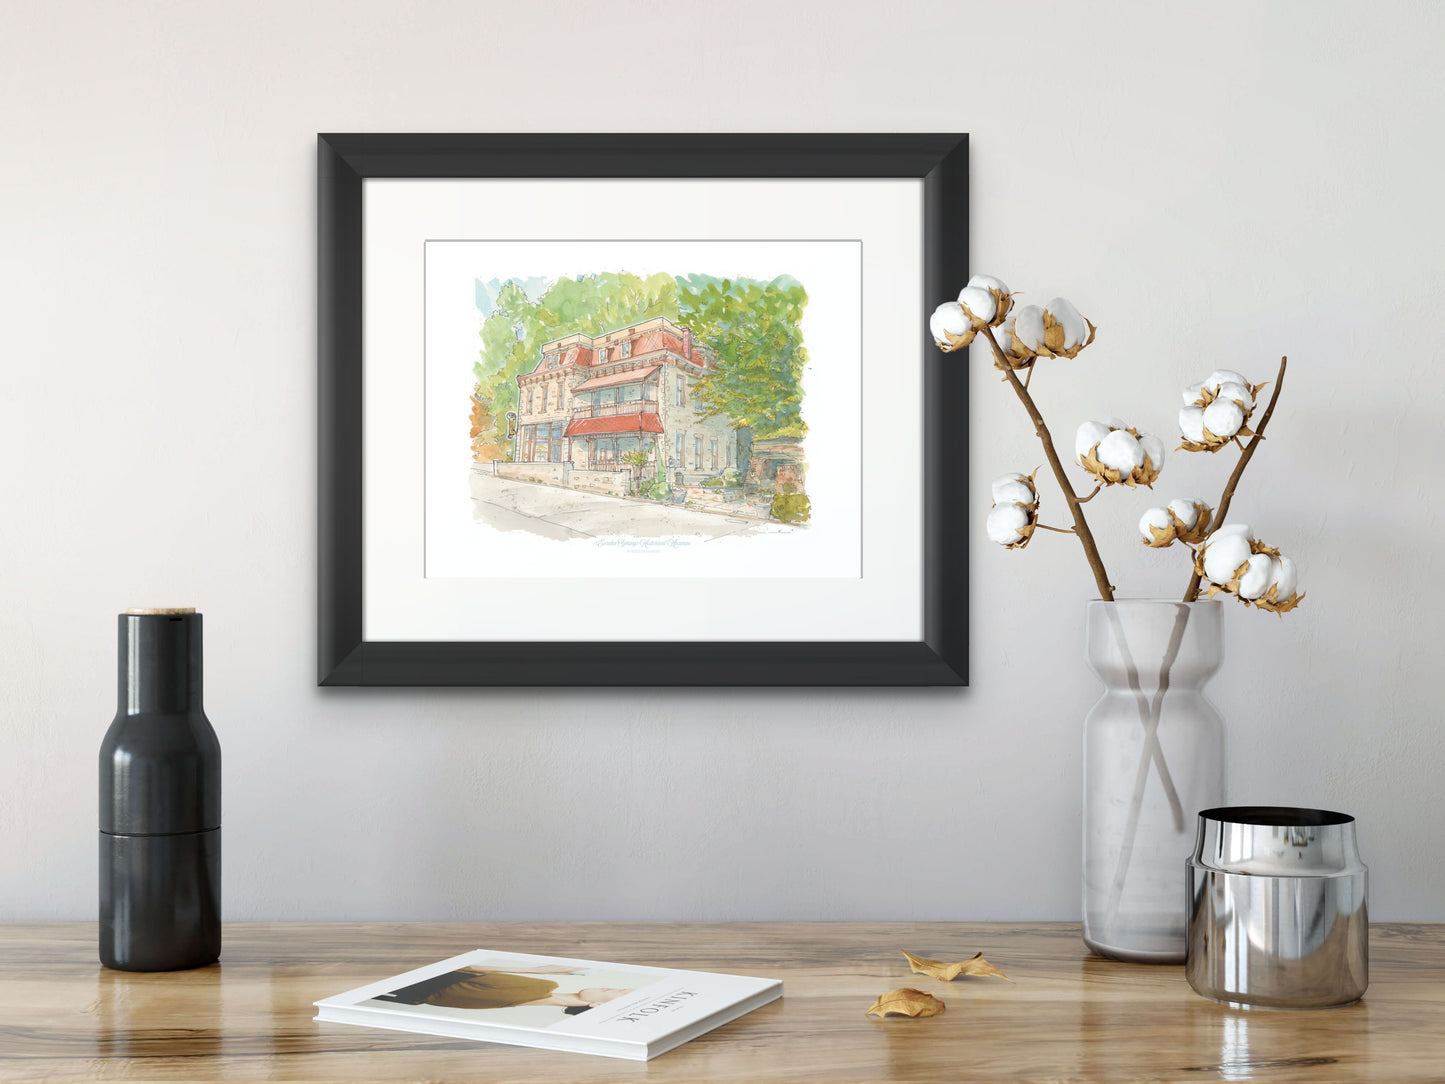 History Museum of Eureka Springs Arkansas - Signed Open Edition Print by Robert R Norman